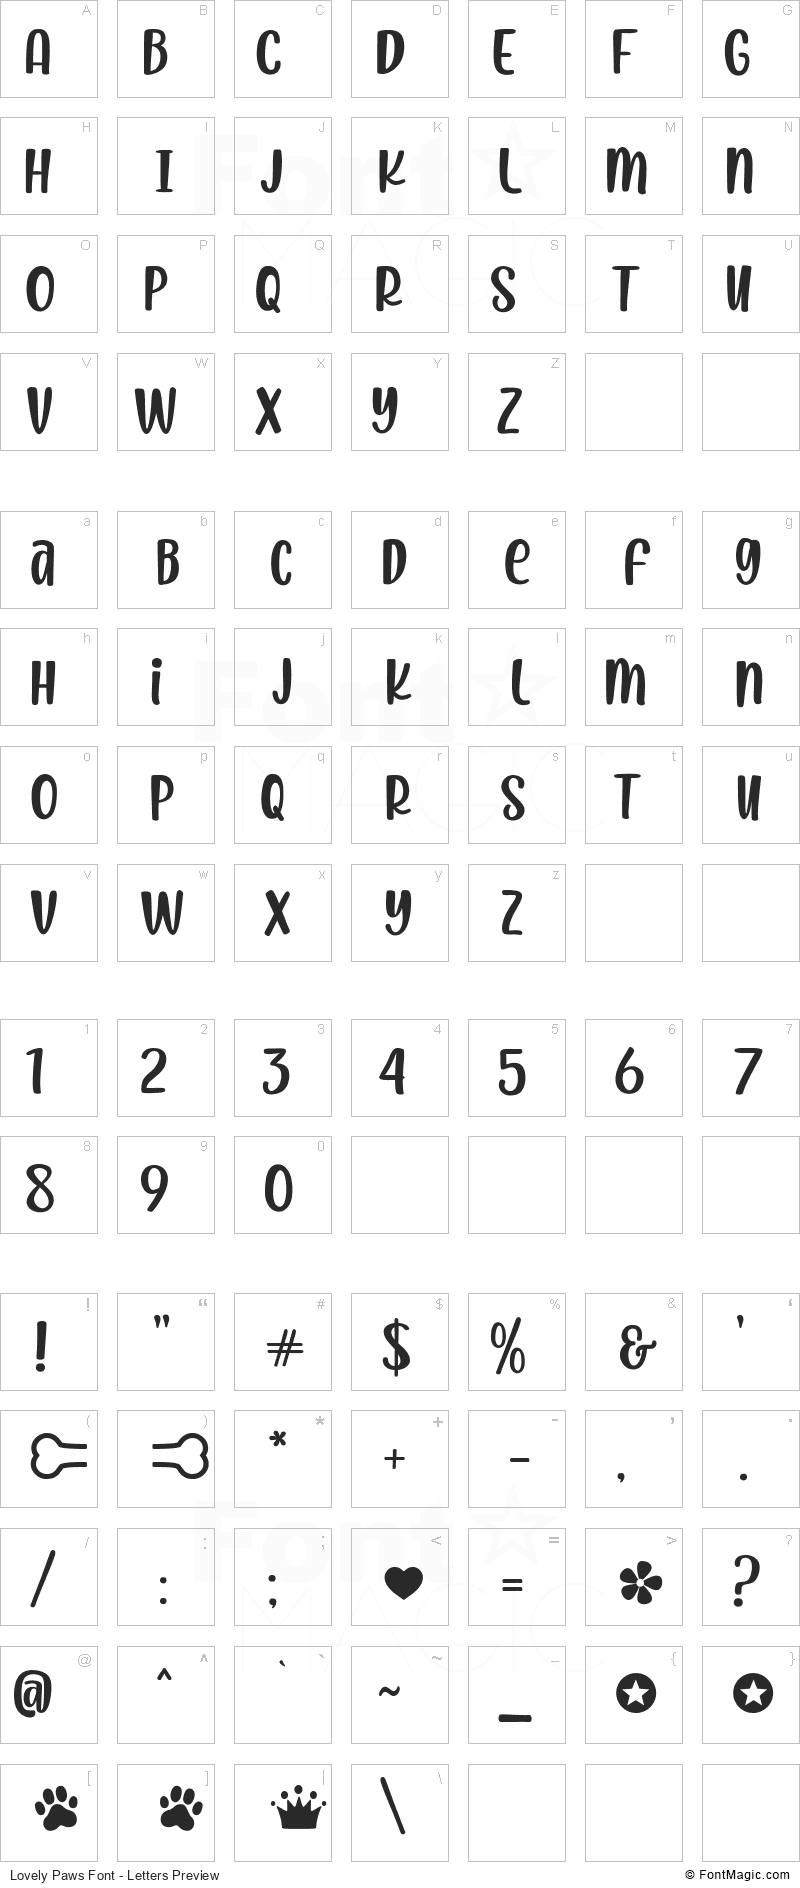 Lovely Paws Font - All Latters Preview Chart